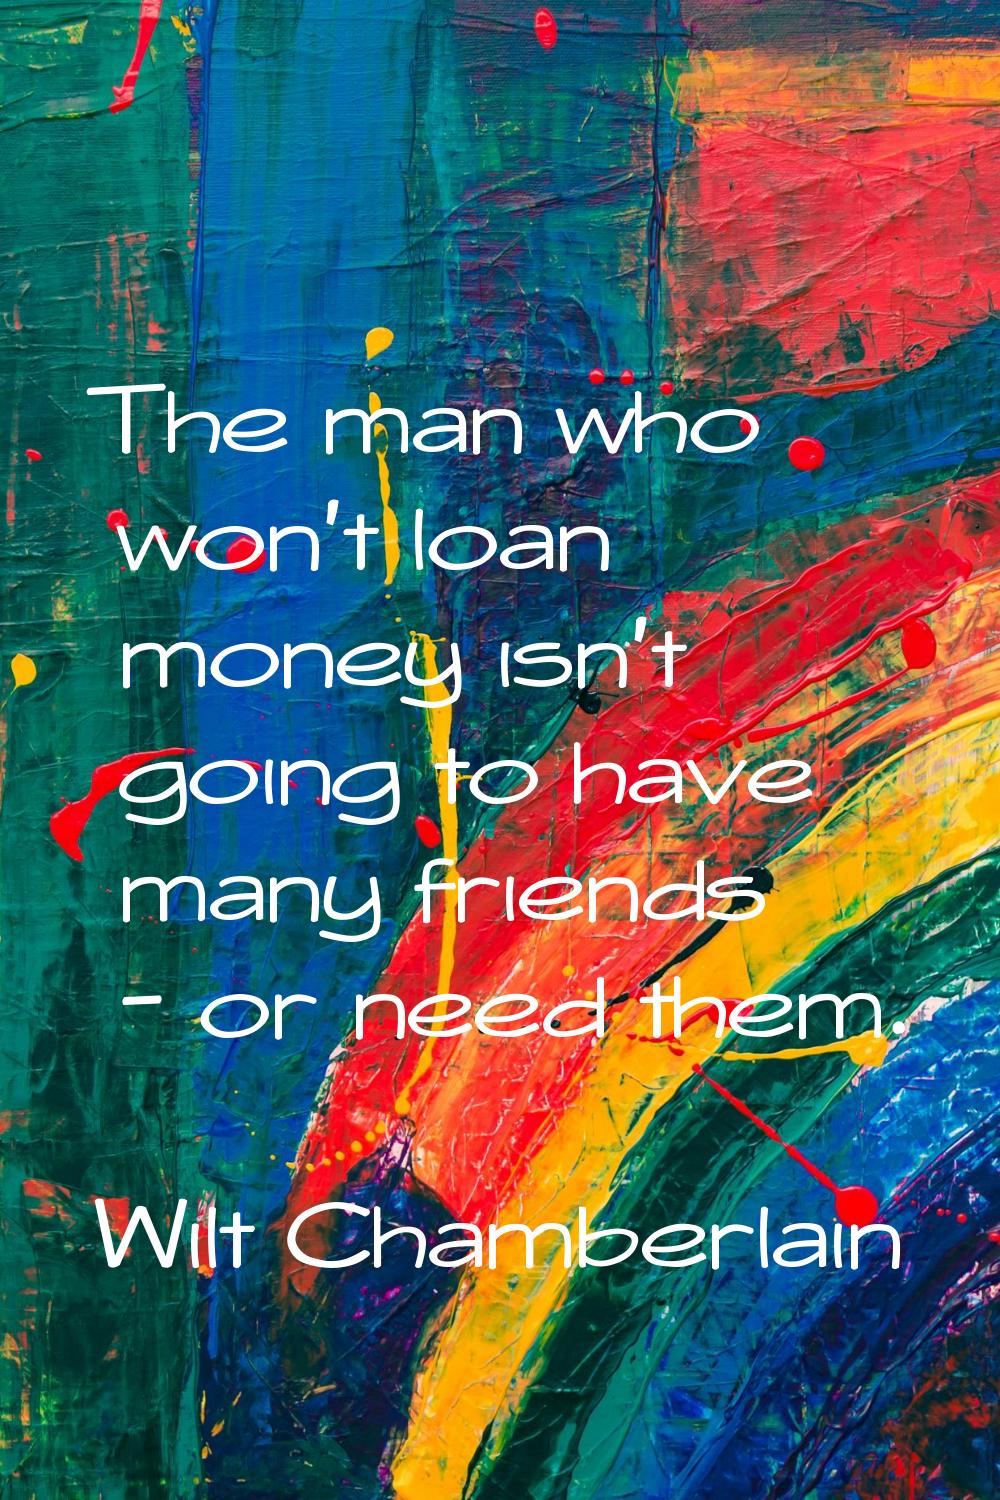 The man who won't loan money isn't going to have many friends - or need them.